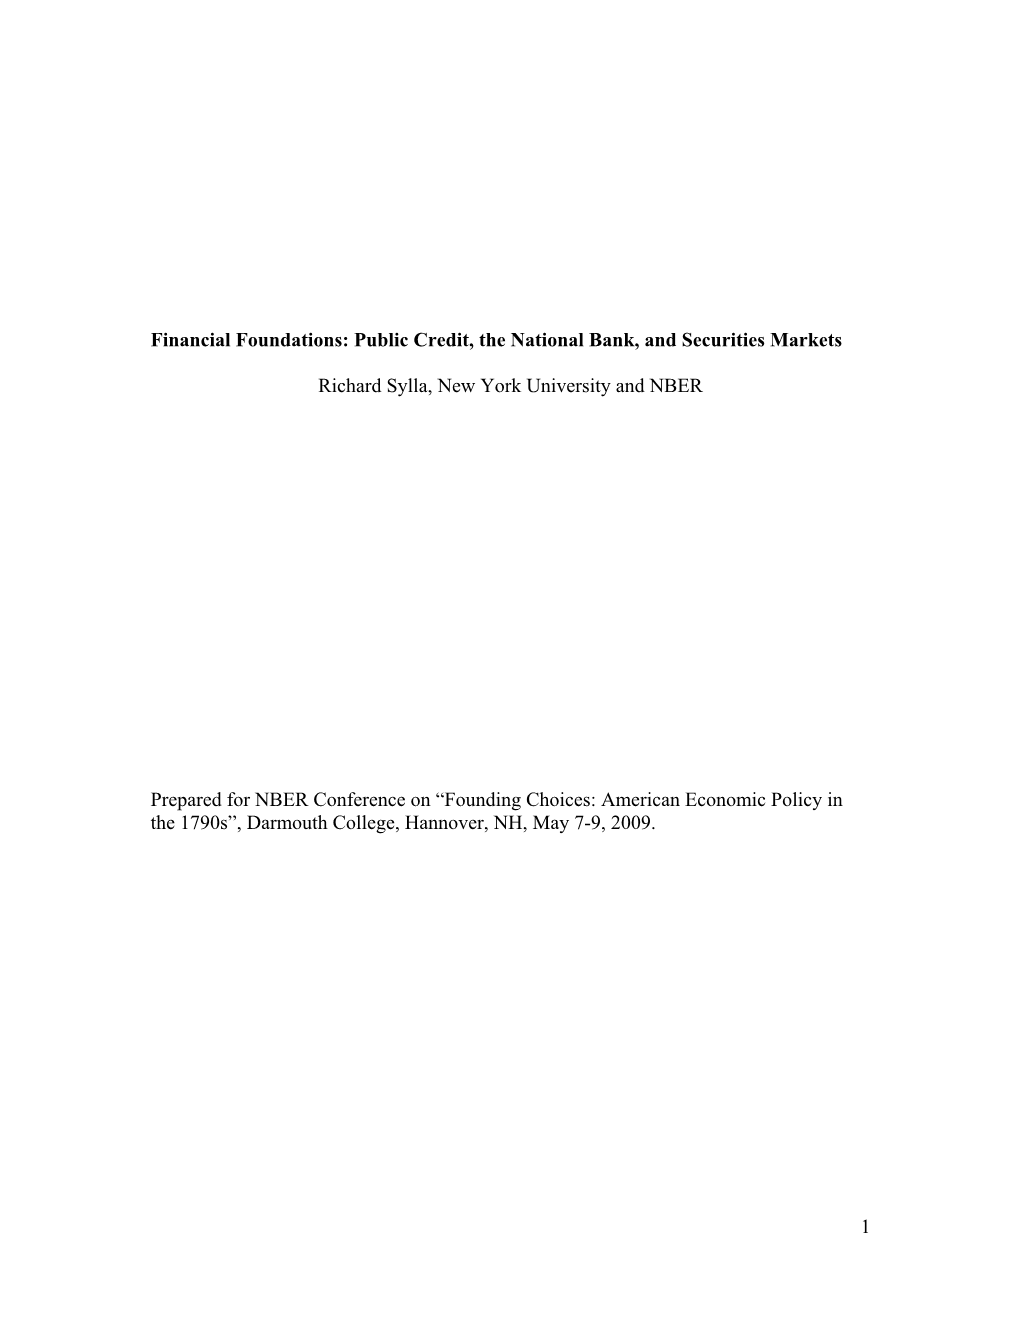 Financial Foundations: Public Credit, the National Bank, and Securities Markets